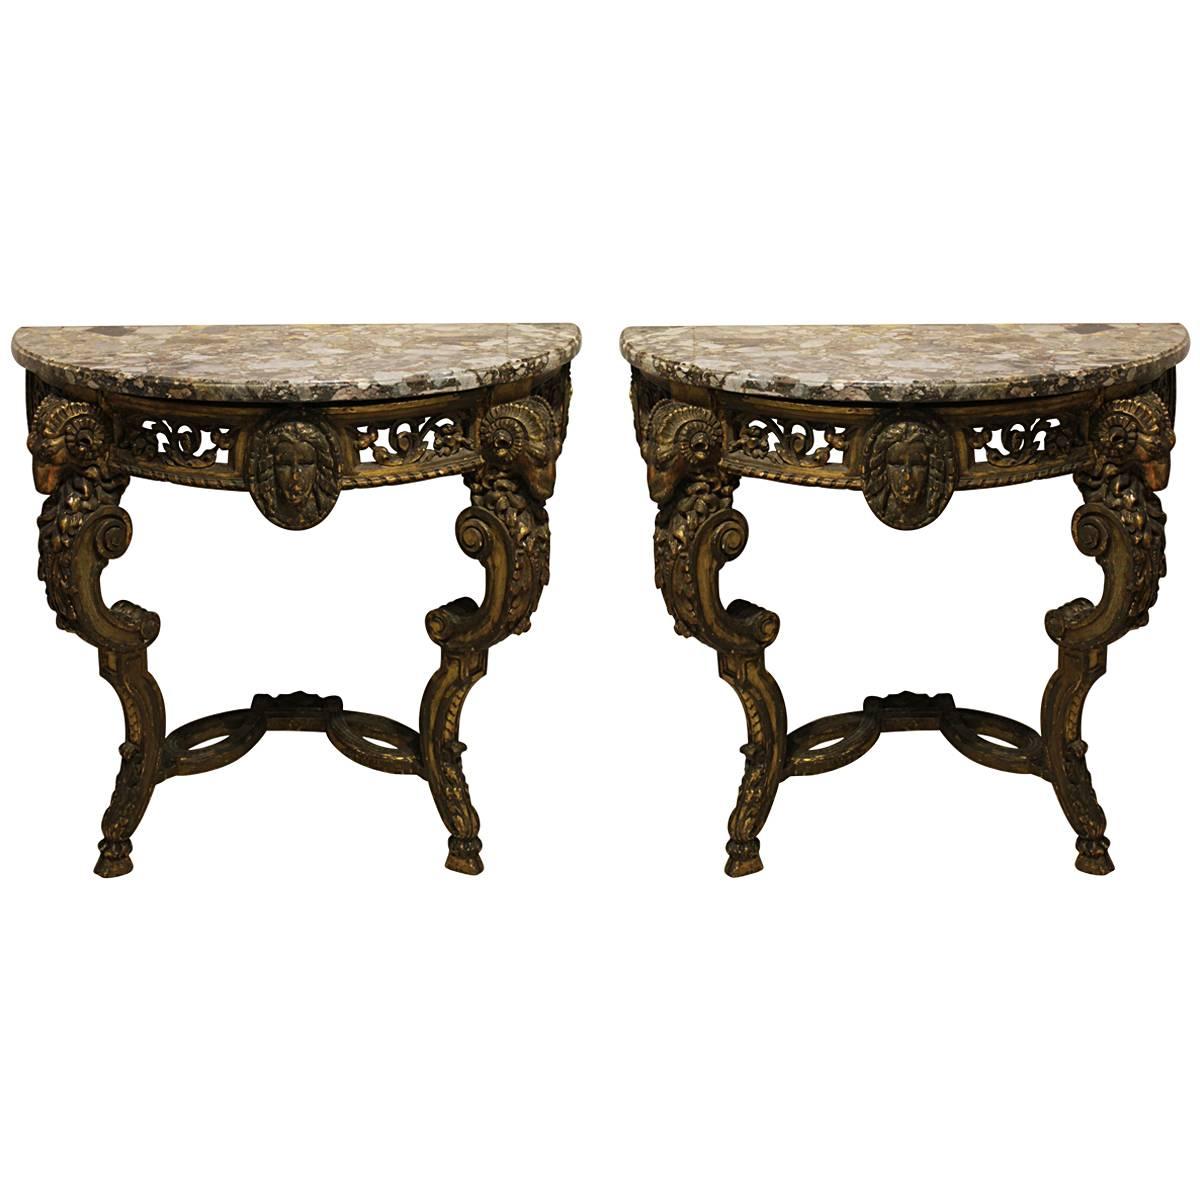 Pair of Italian Carved Giltwood Console Tables